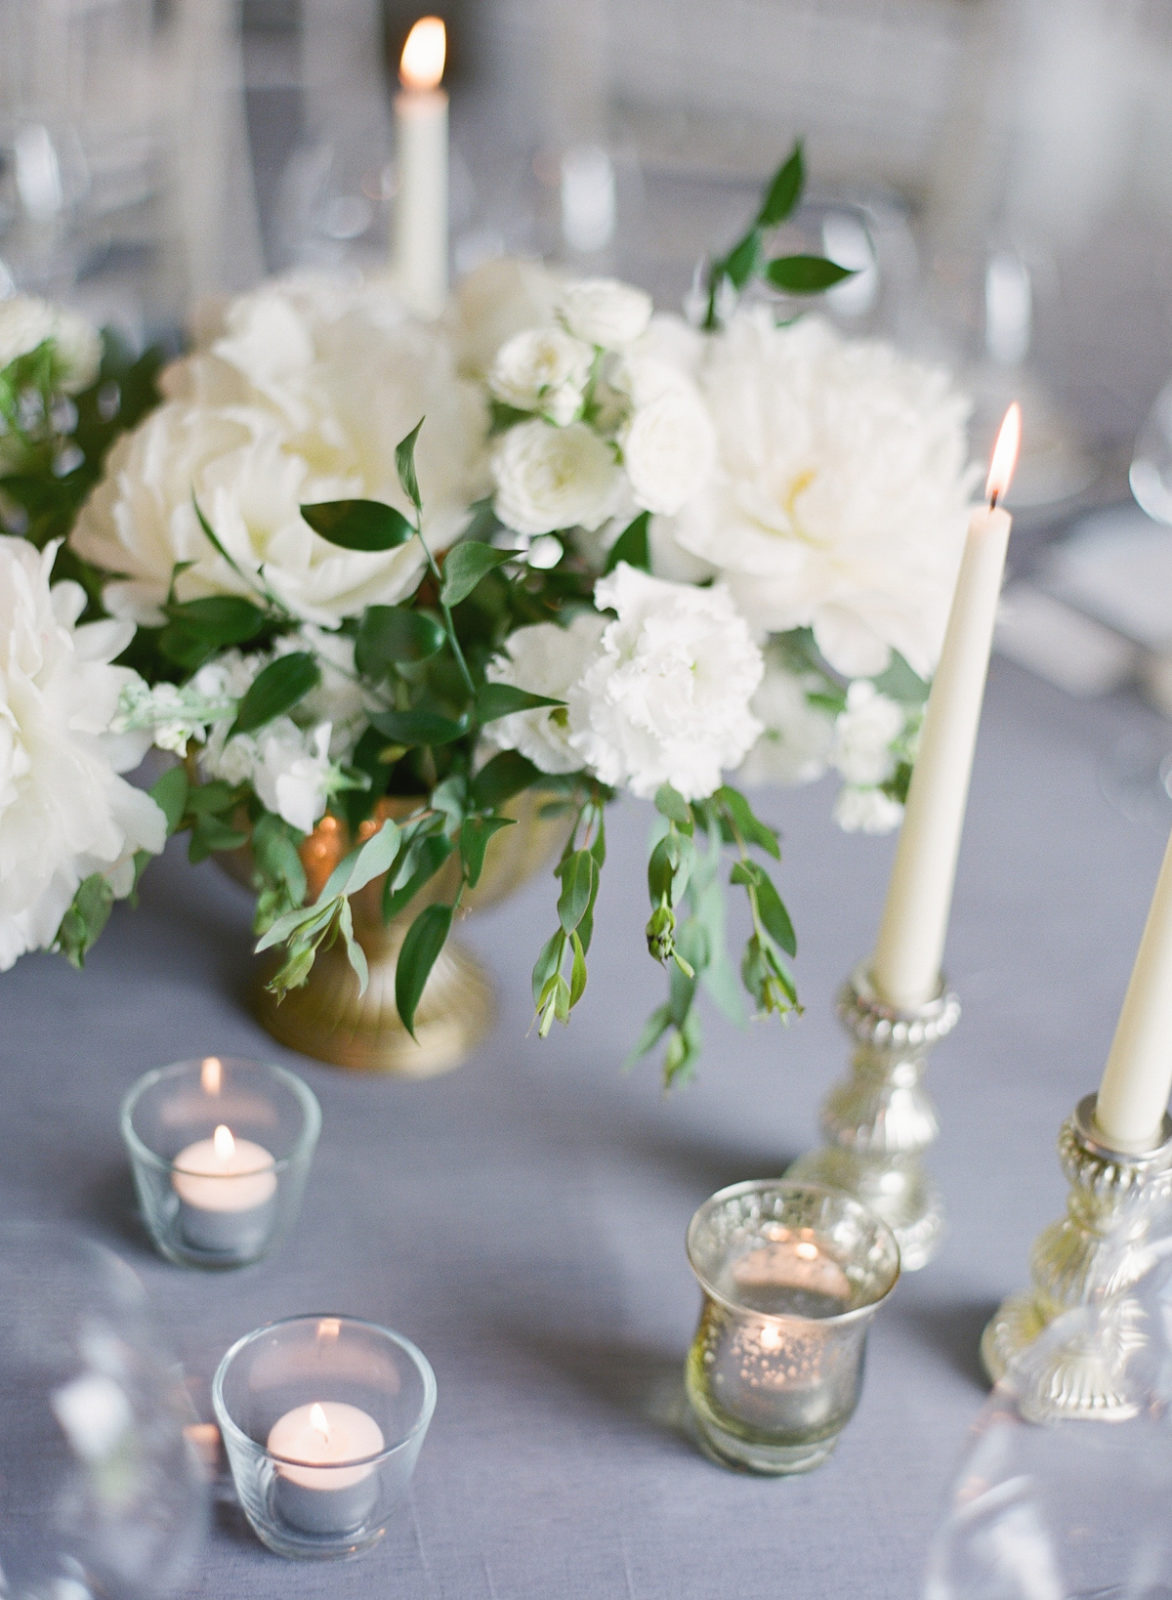 Ireland Film Photographer | Molly Carr Photography | Mount Juliet Estate Lady Helen Dining Room Wedding Reception with White Wedding Flowers and Candles